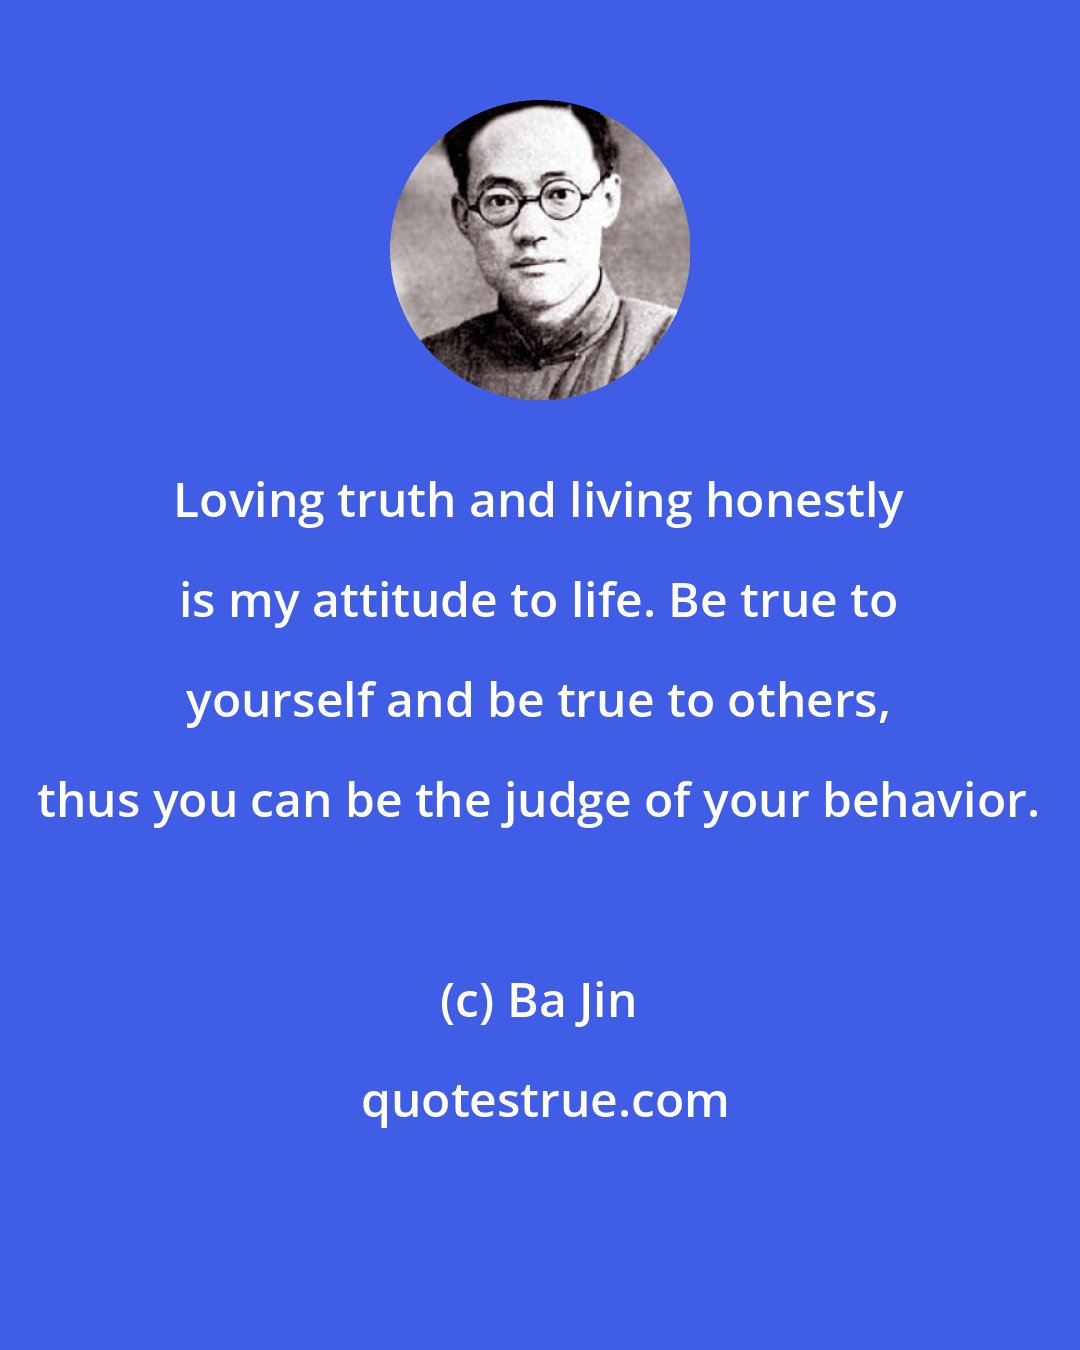 Ba Jin: Loving truth and living honestly is my attitude to life. Be true to yourself and be true to others, thus you can be the judge of your behavior.